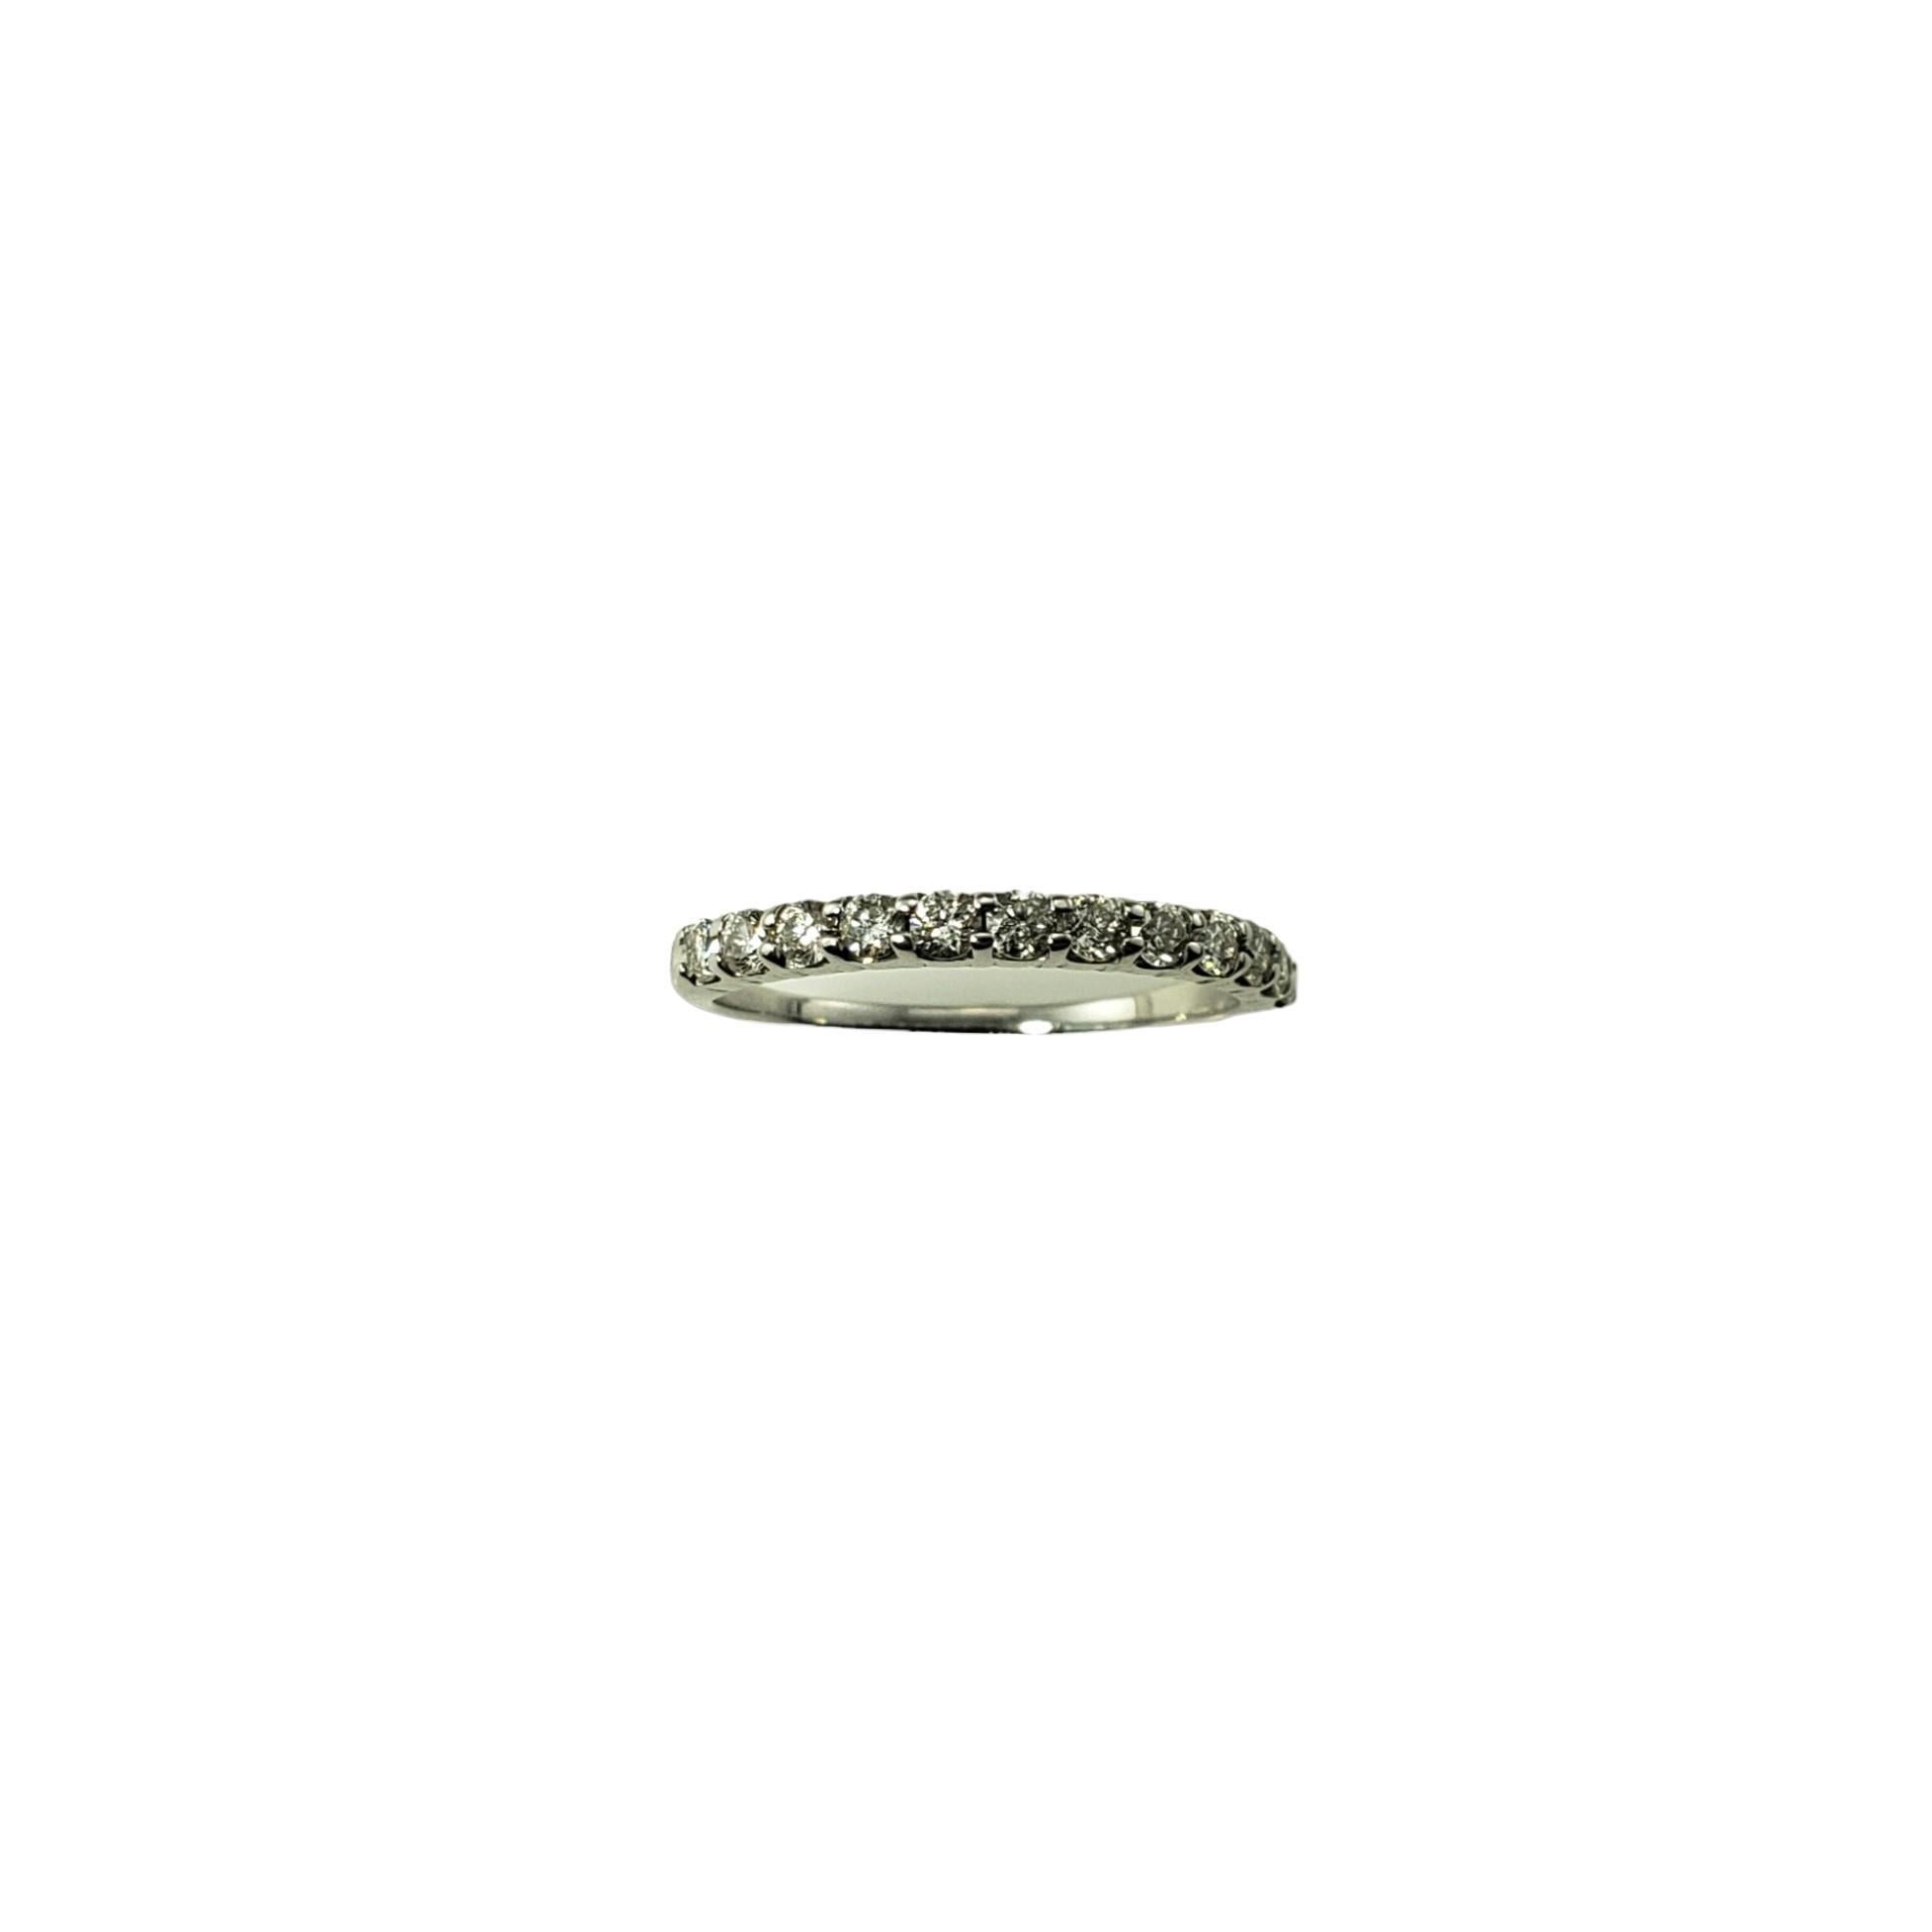 Vintage 10K White Gold and Diamond Band Ring Size 7.25-

This sparkling band features 12 round brilliant cut diamond set in classic 10K white gold.  Width: 2 mm.  Shank: 1.3 mm.

Approximate total diamond weight: .36 ct. 

Diamond clarity: 